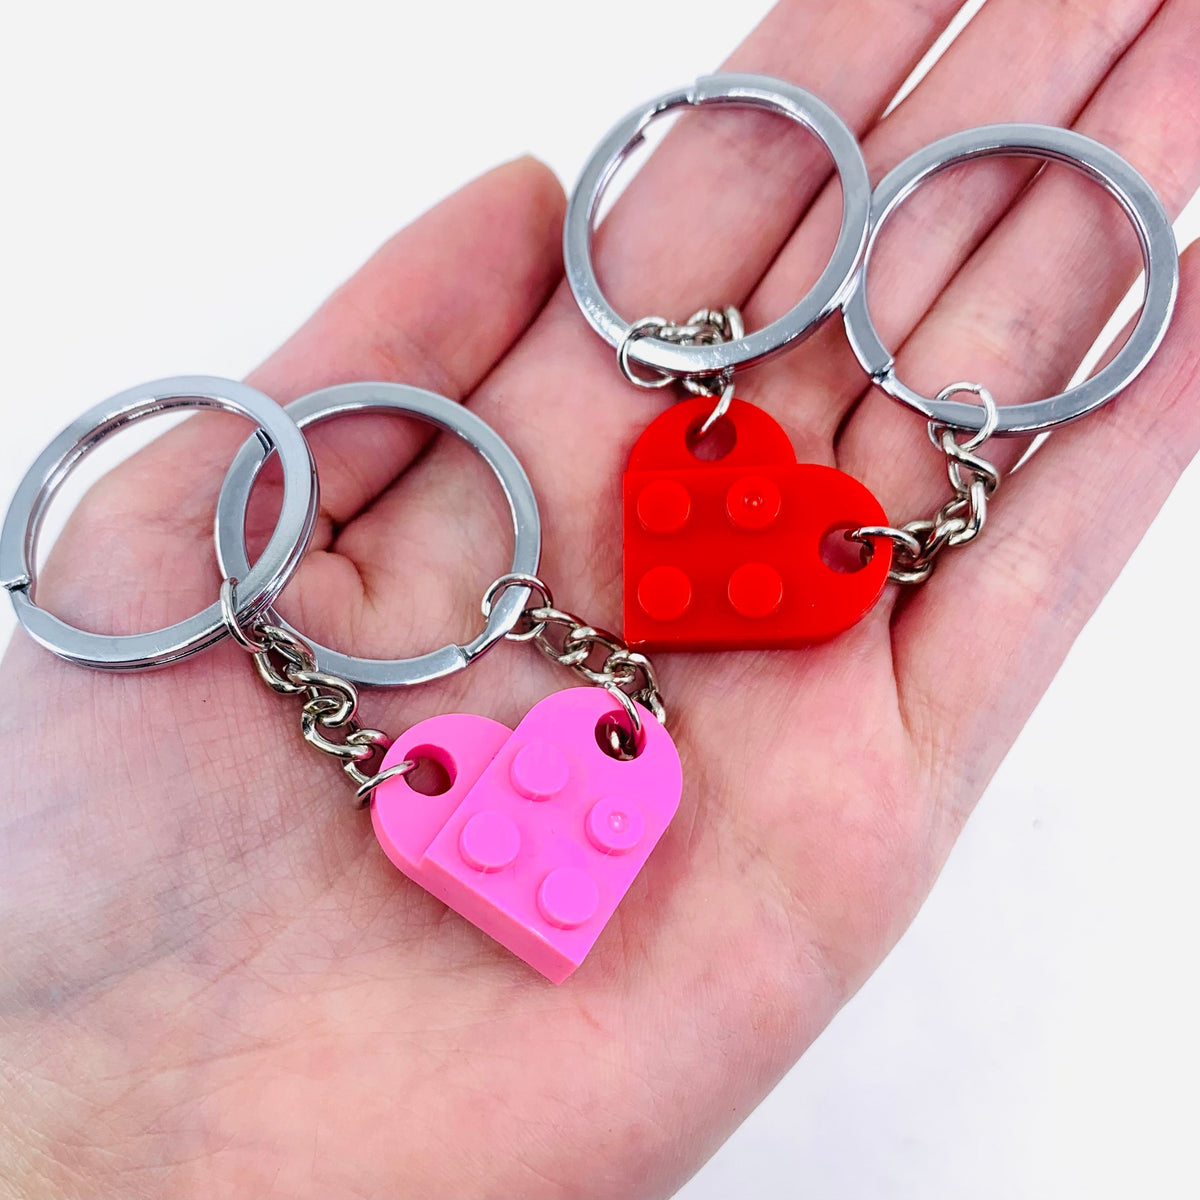 LEGO ® heart to make necklace or keychain